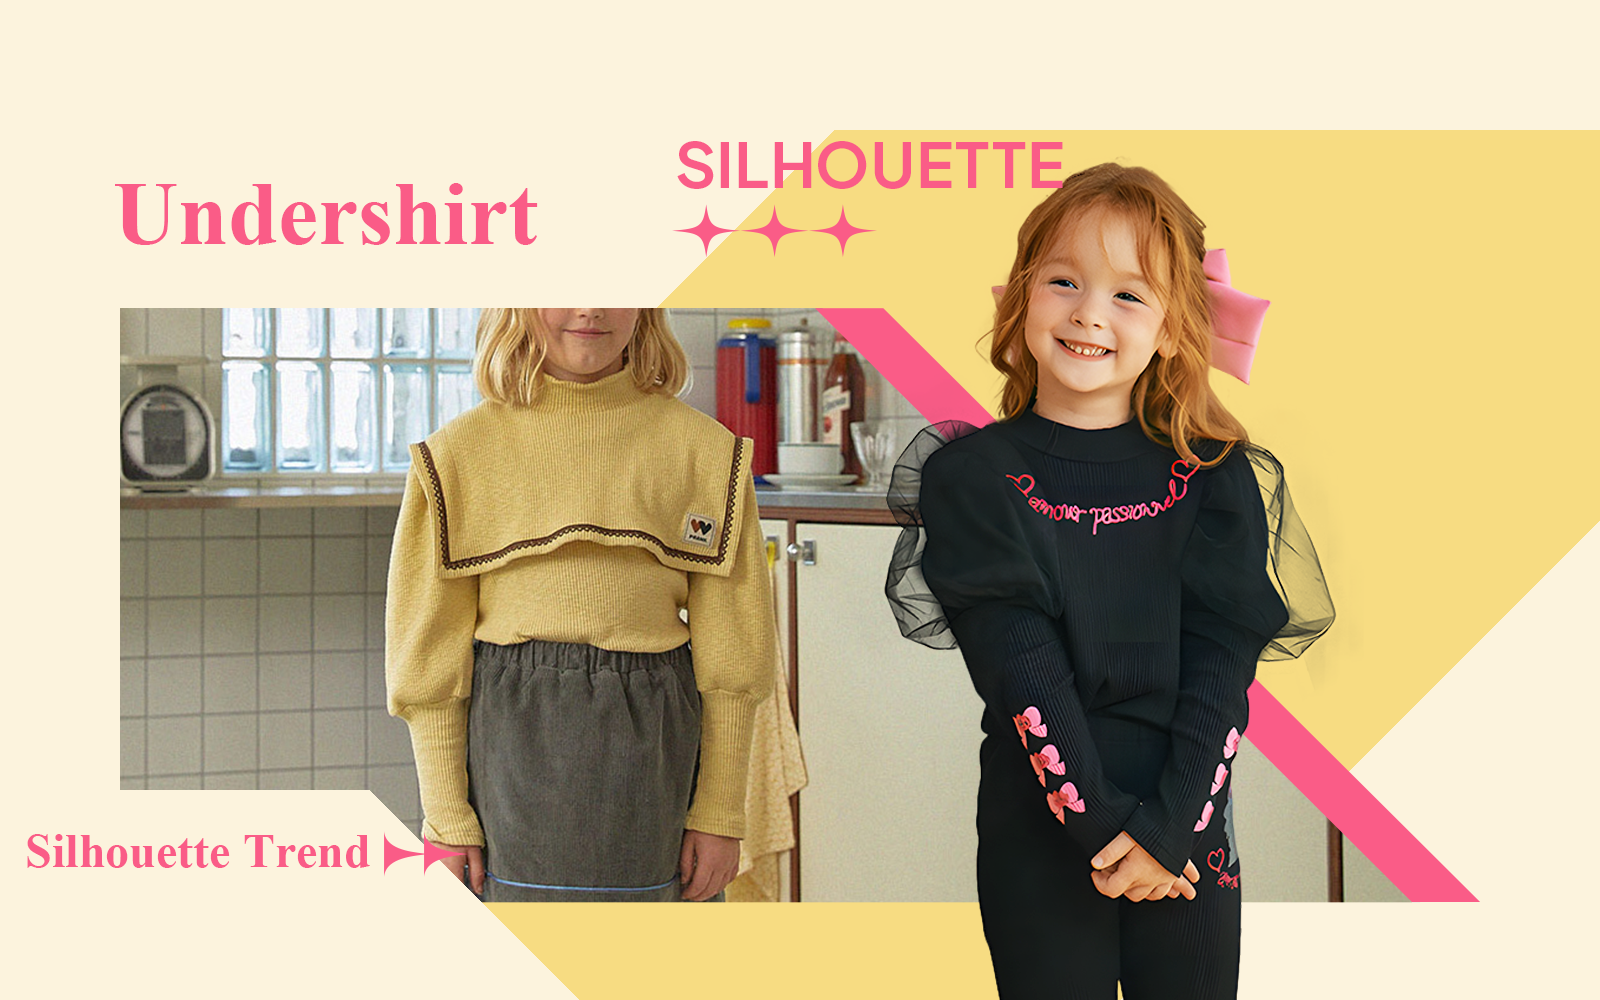 Undershirt -- The Silhouette Trend for Girlswear